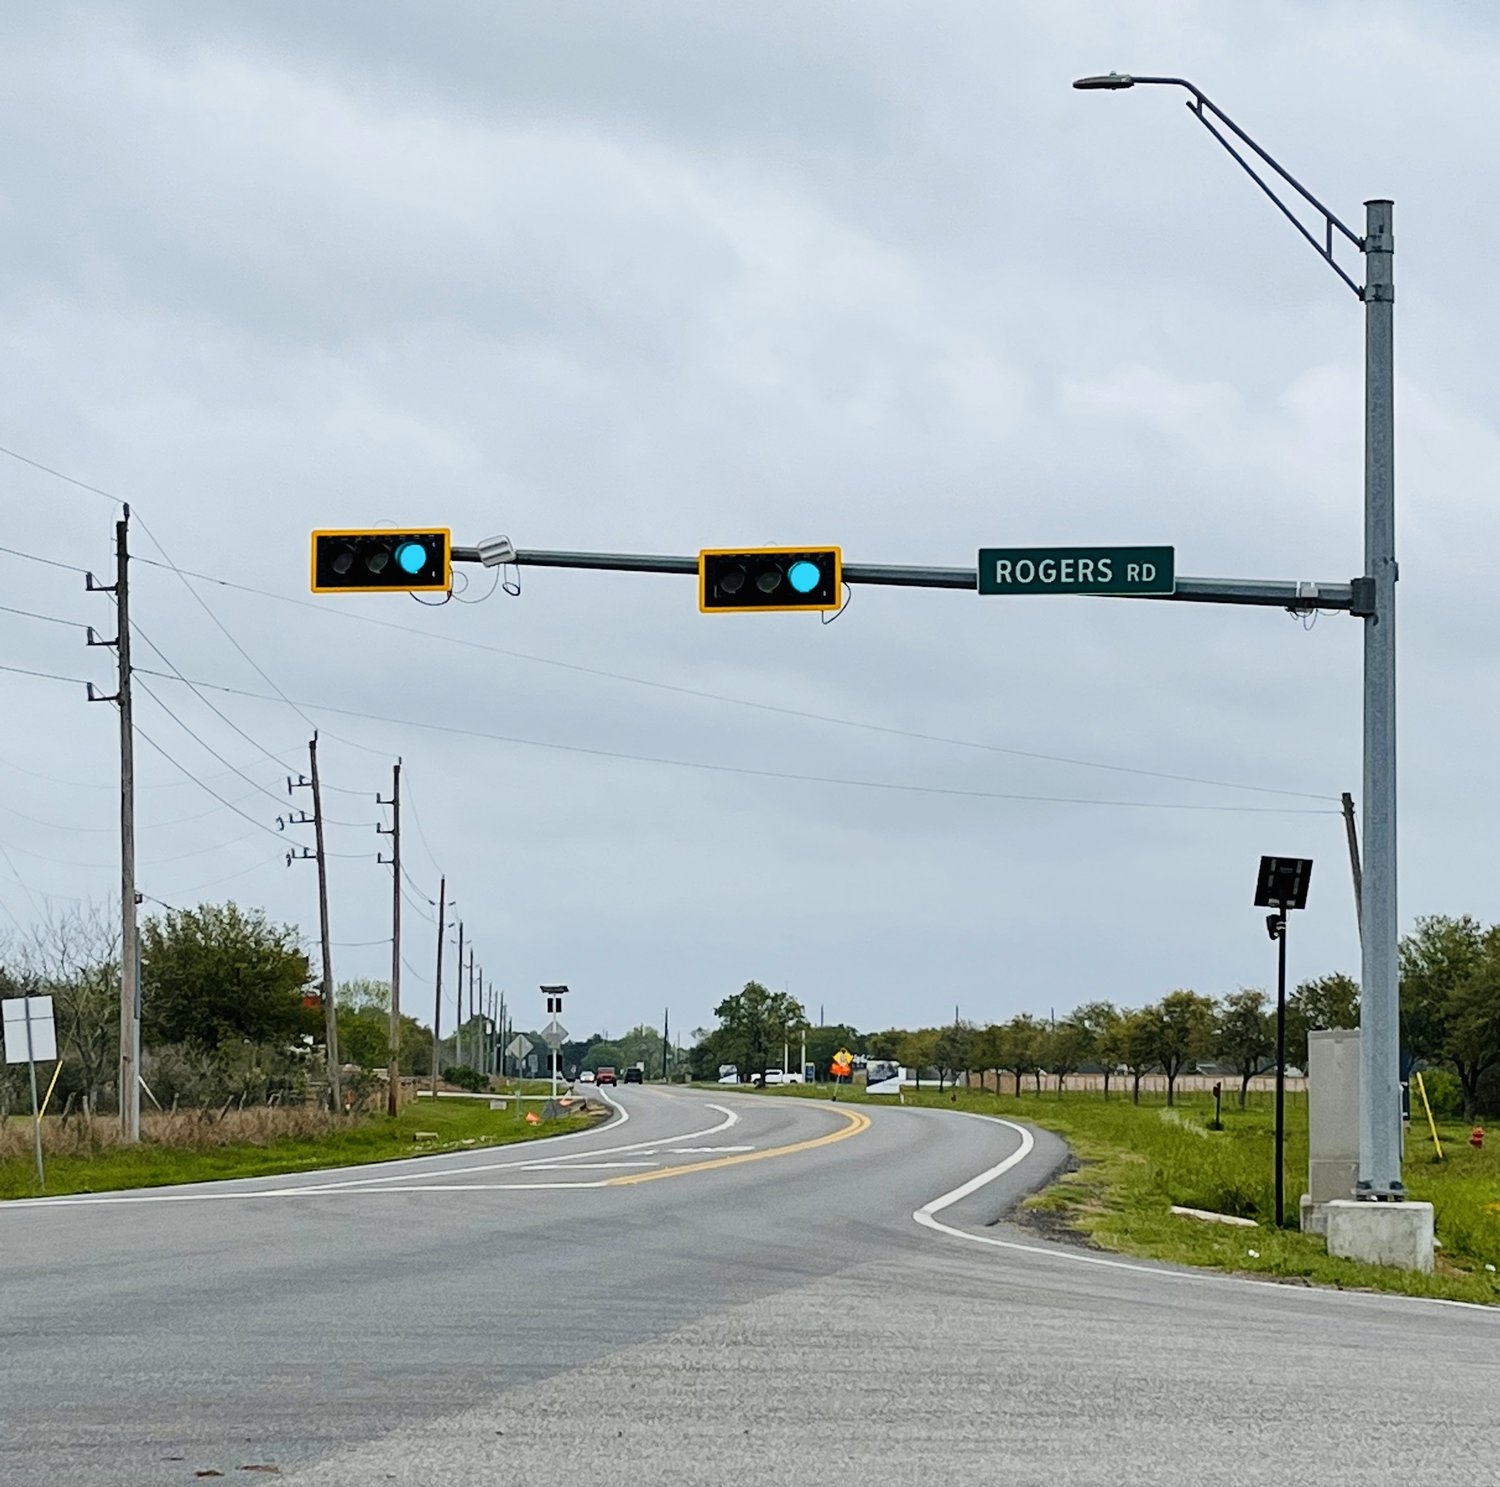 In response to ongoing residential and commercial growth in the Fulshear area, the caution light signal at the FM 359-Rogers Road intersection has been replaced with red light signals.